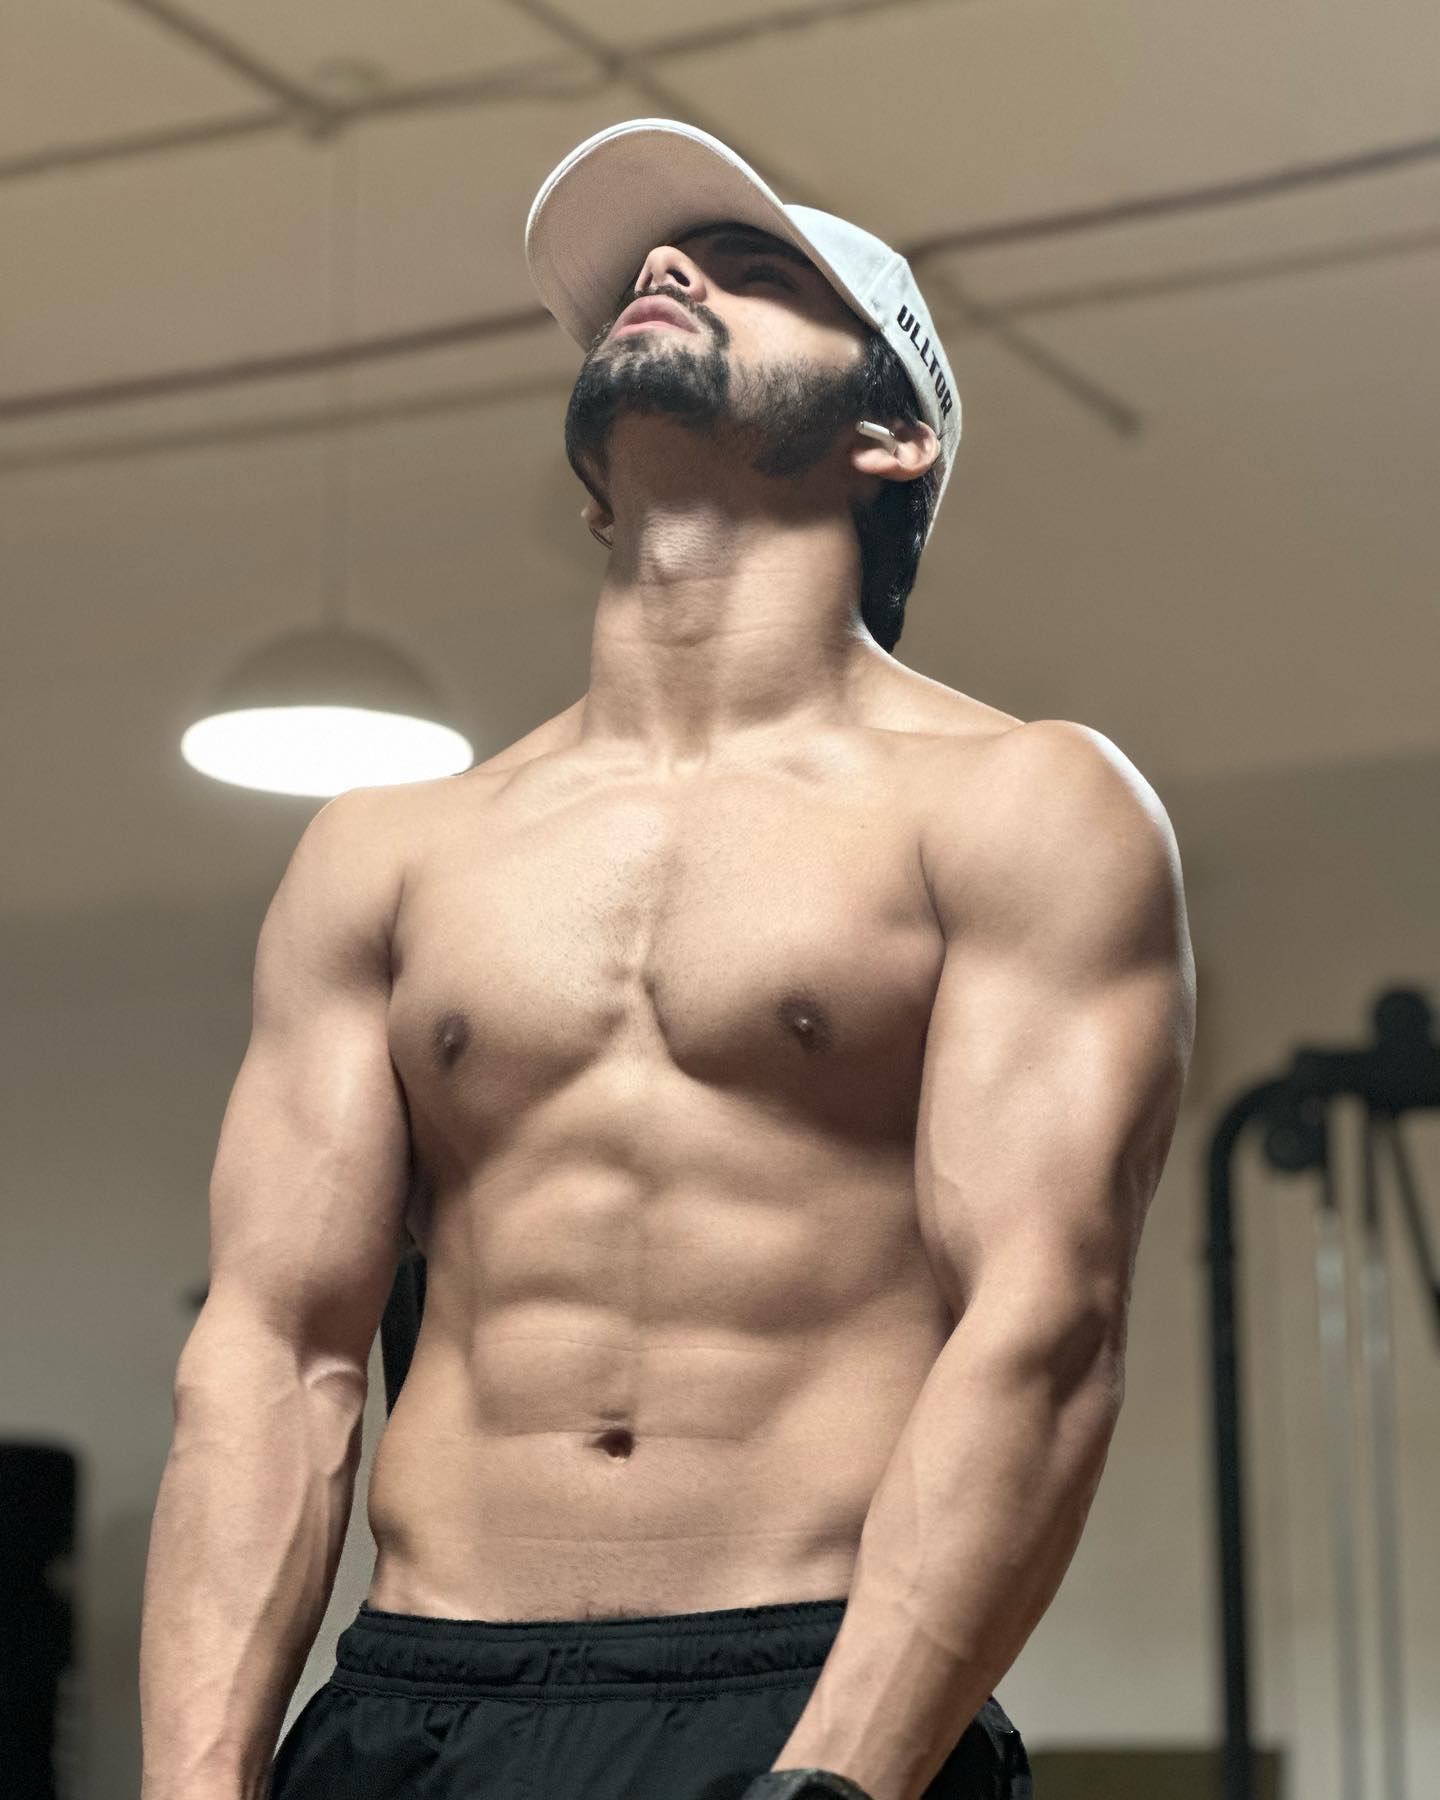 Siddharth Nigam looks rugged n roaring in his latest shirtless gym photo 844688